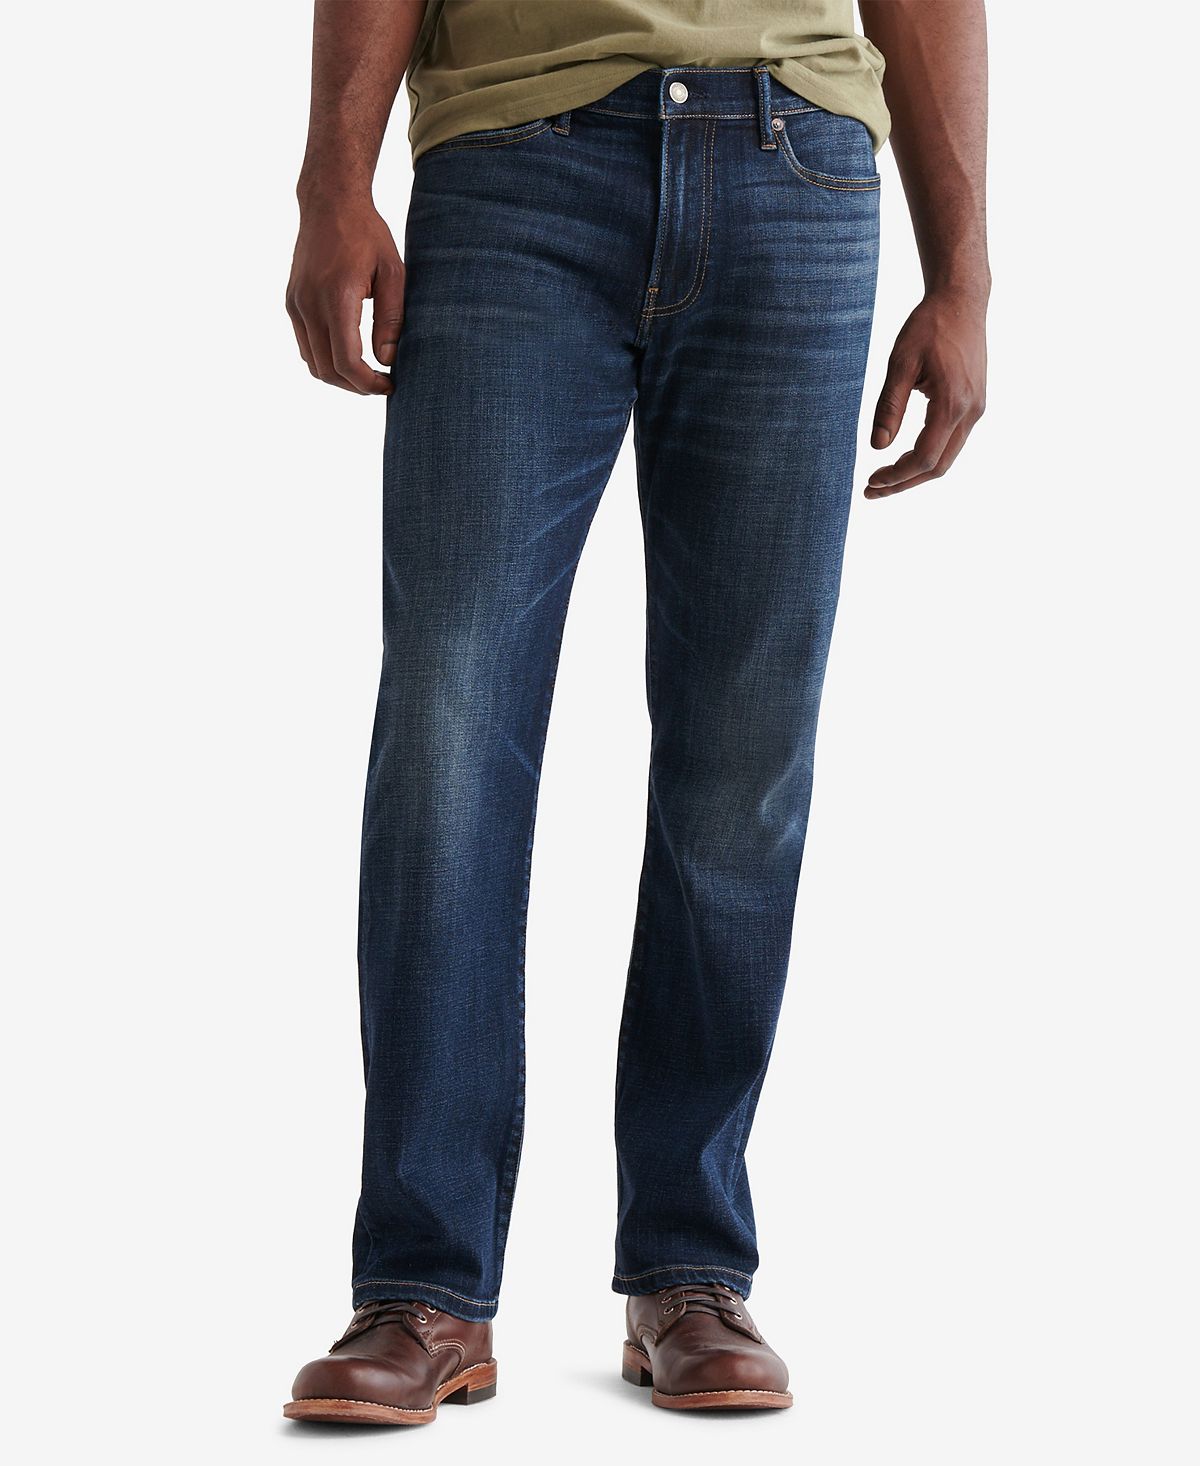 Lucky Brand Men's 410 Athletic Straight Stretch Jean - Fayette